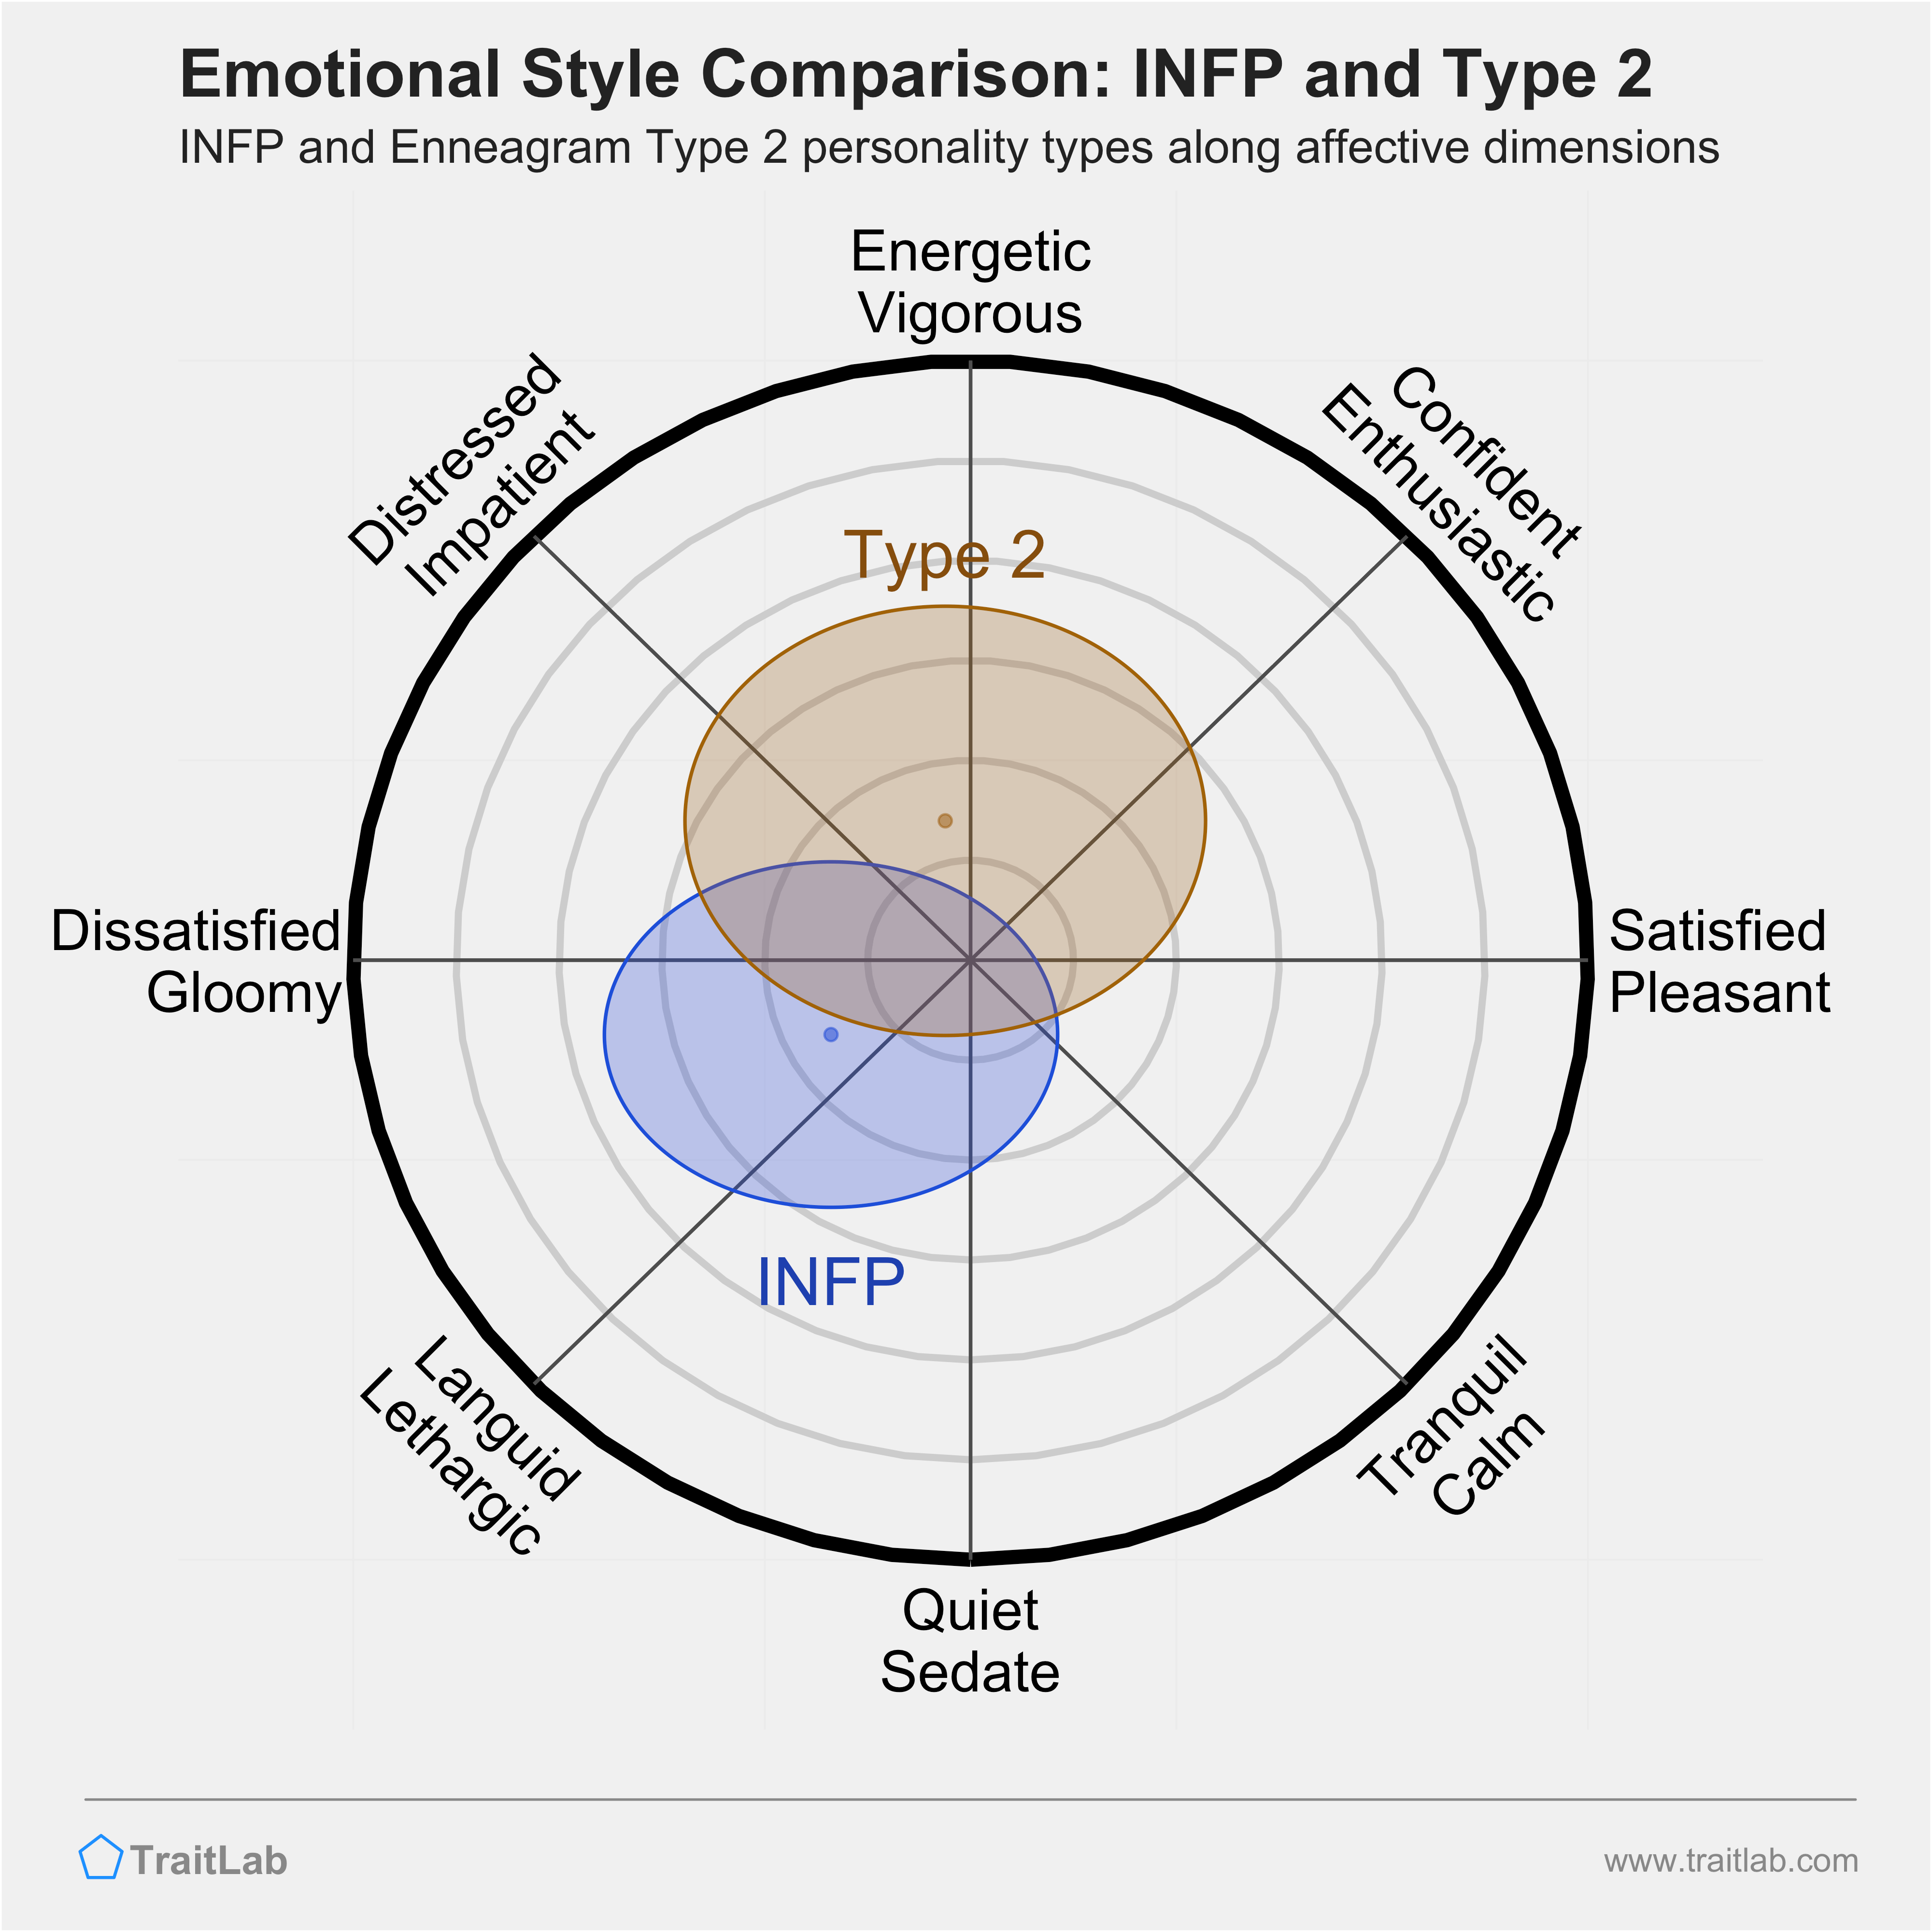 INFP and Type 2 comparison across emotional (affective) dimensions